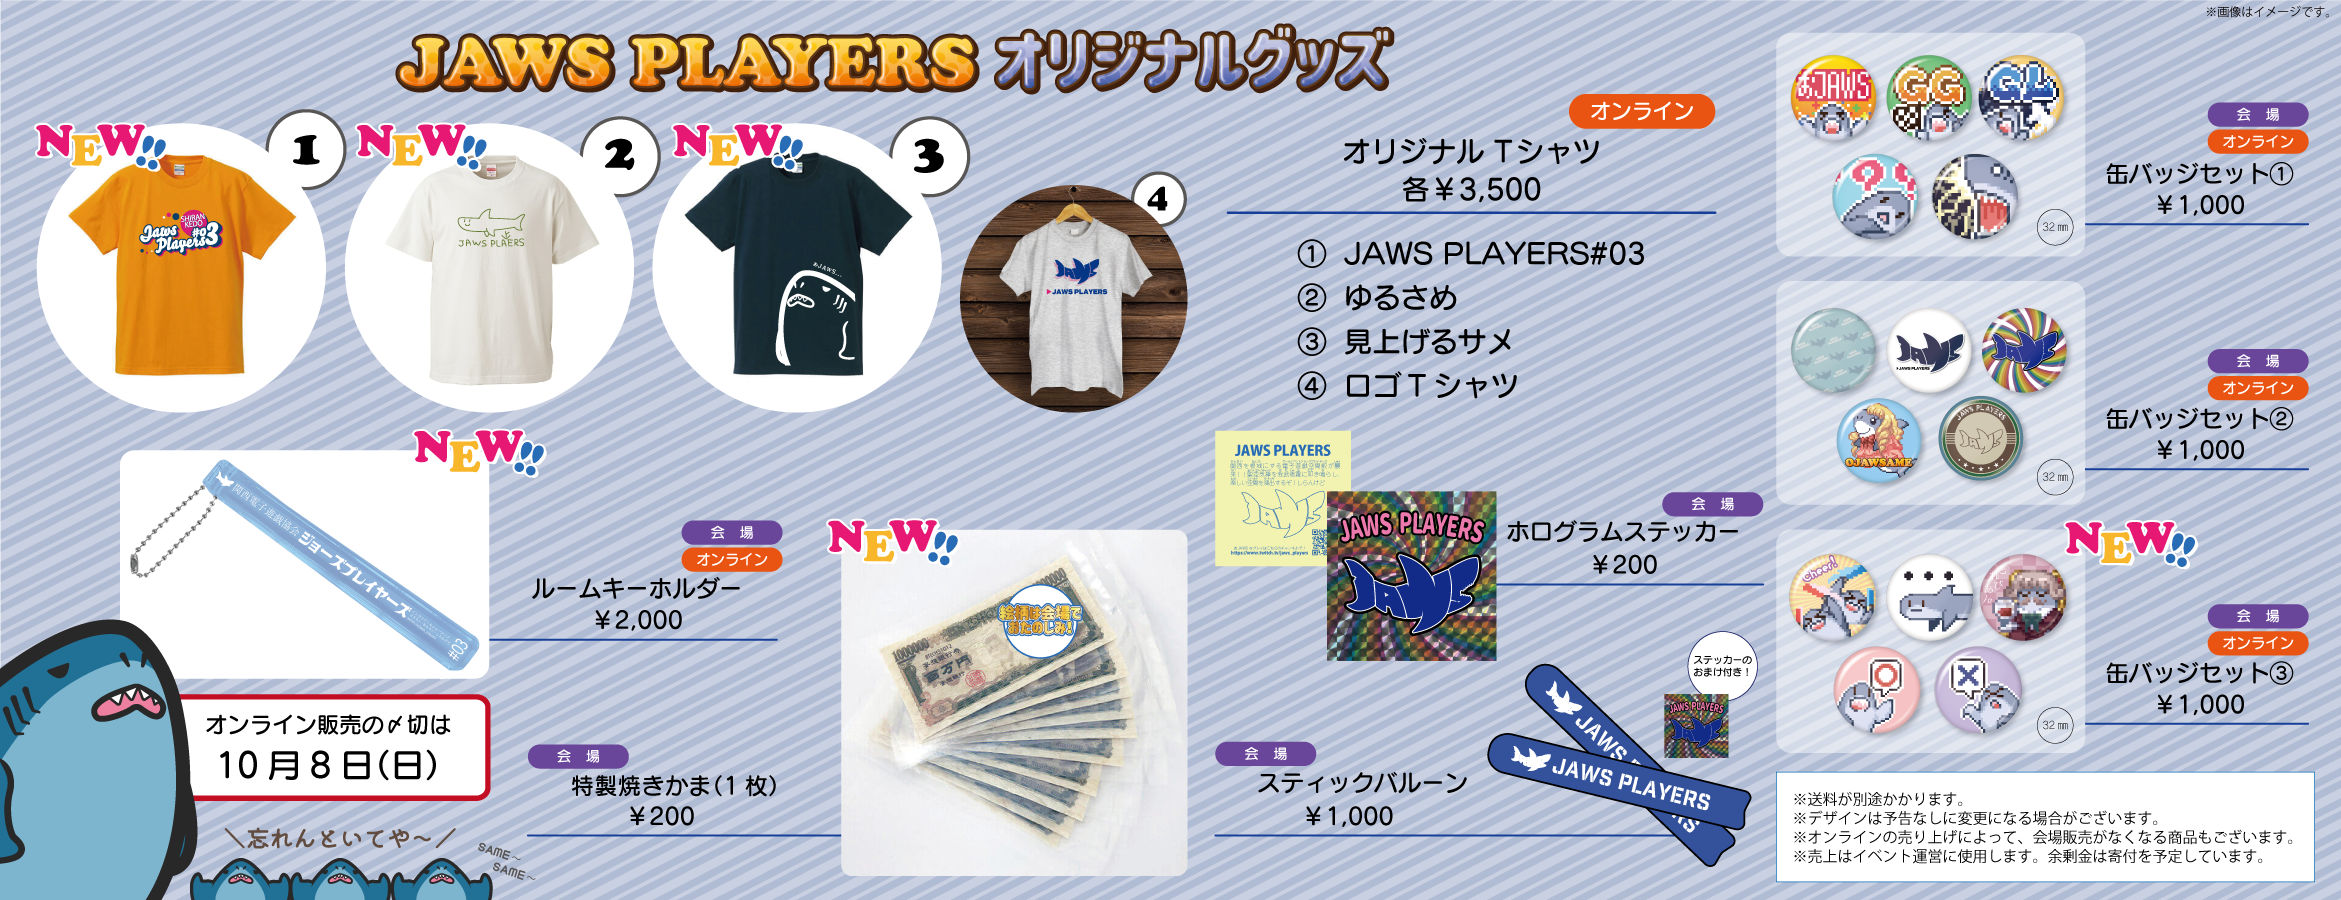 JAWS PLAYERS#03グッズ一覧